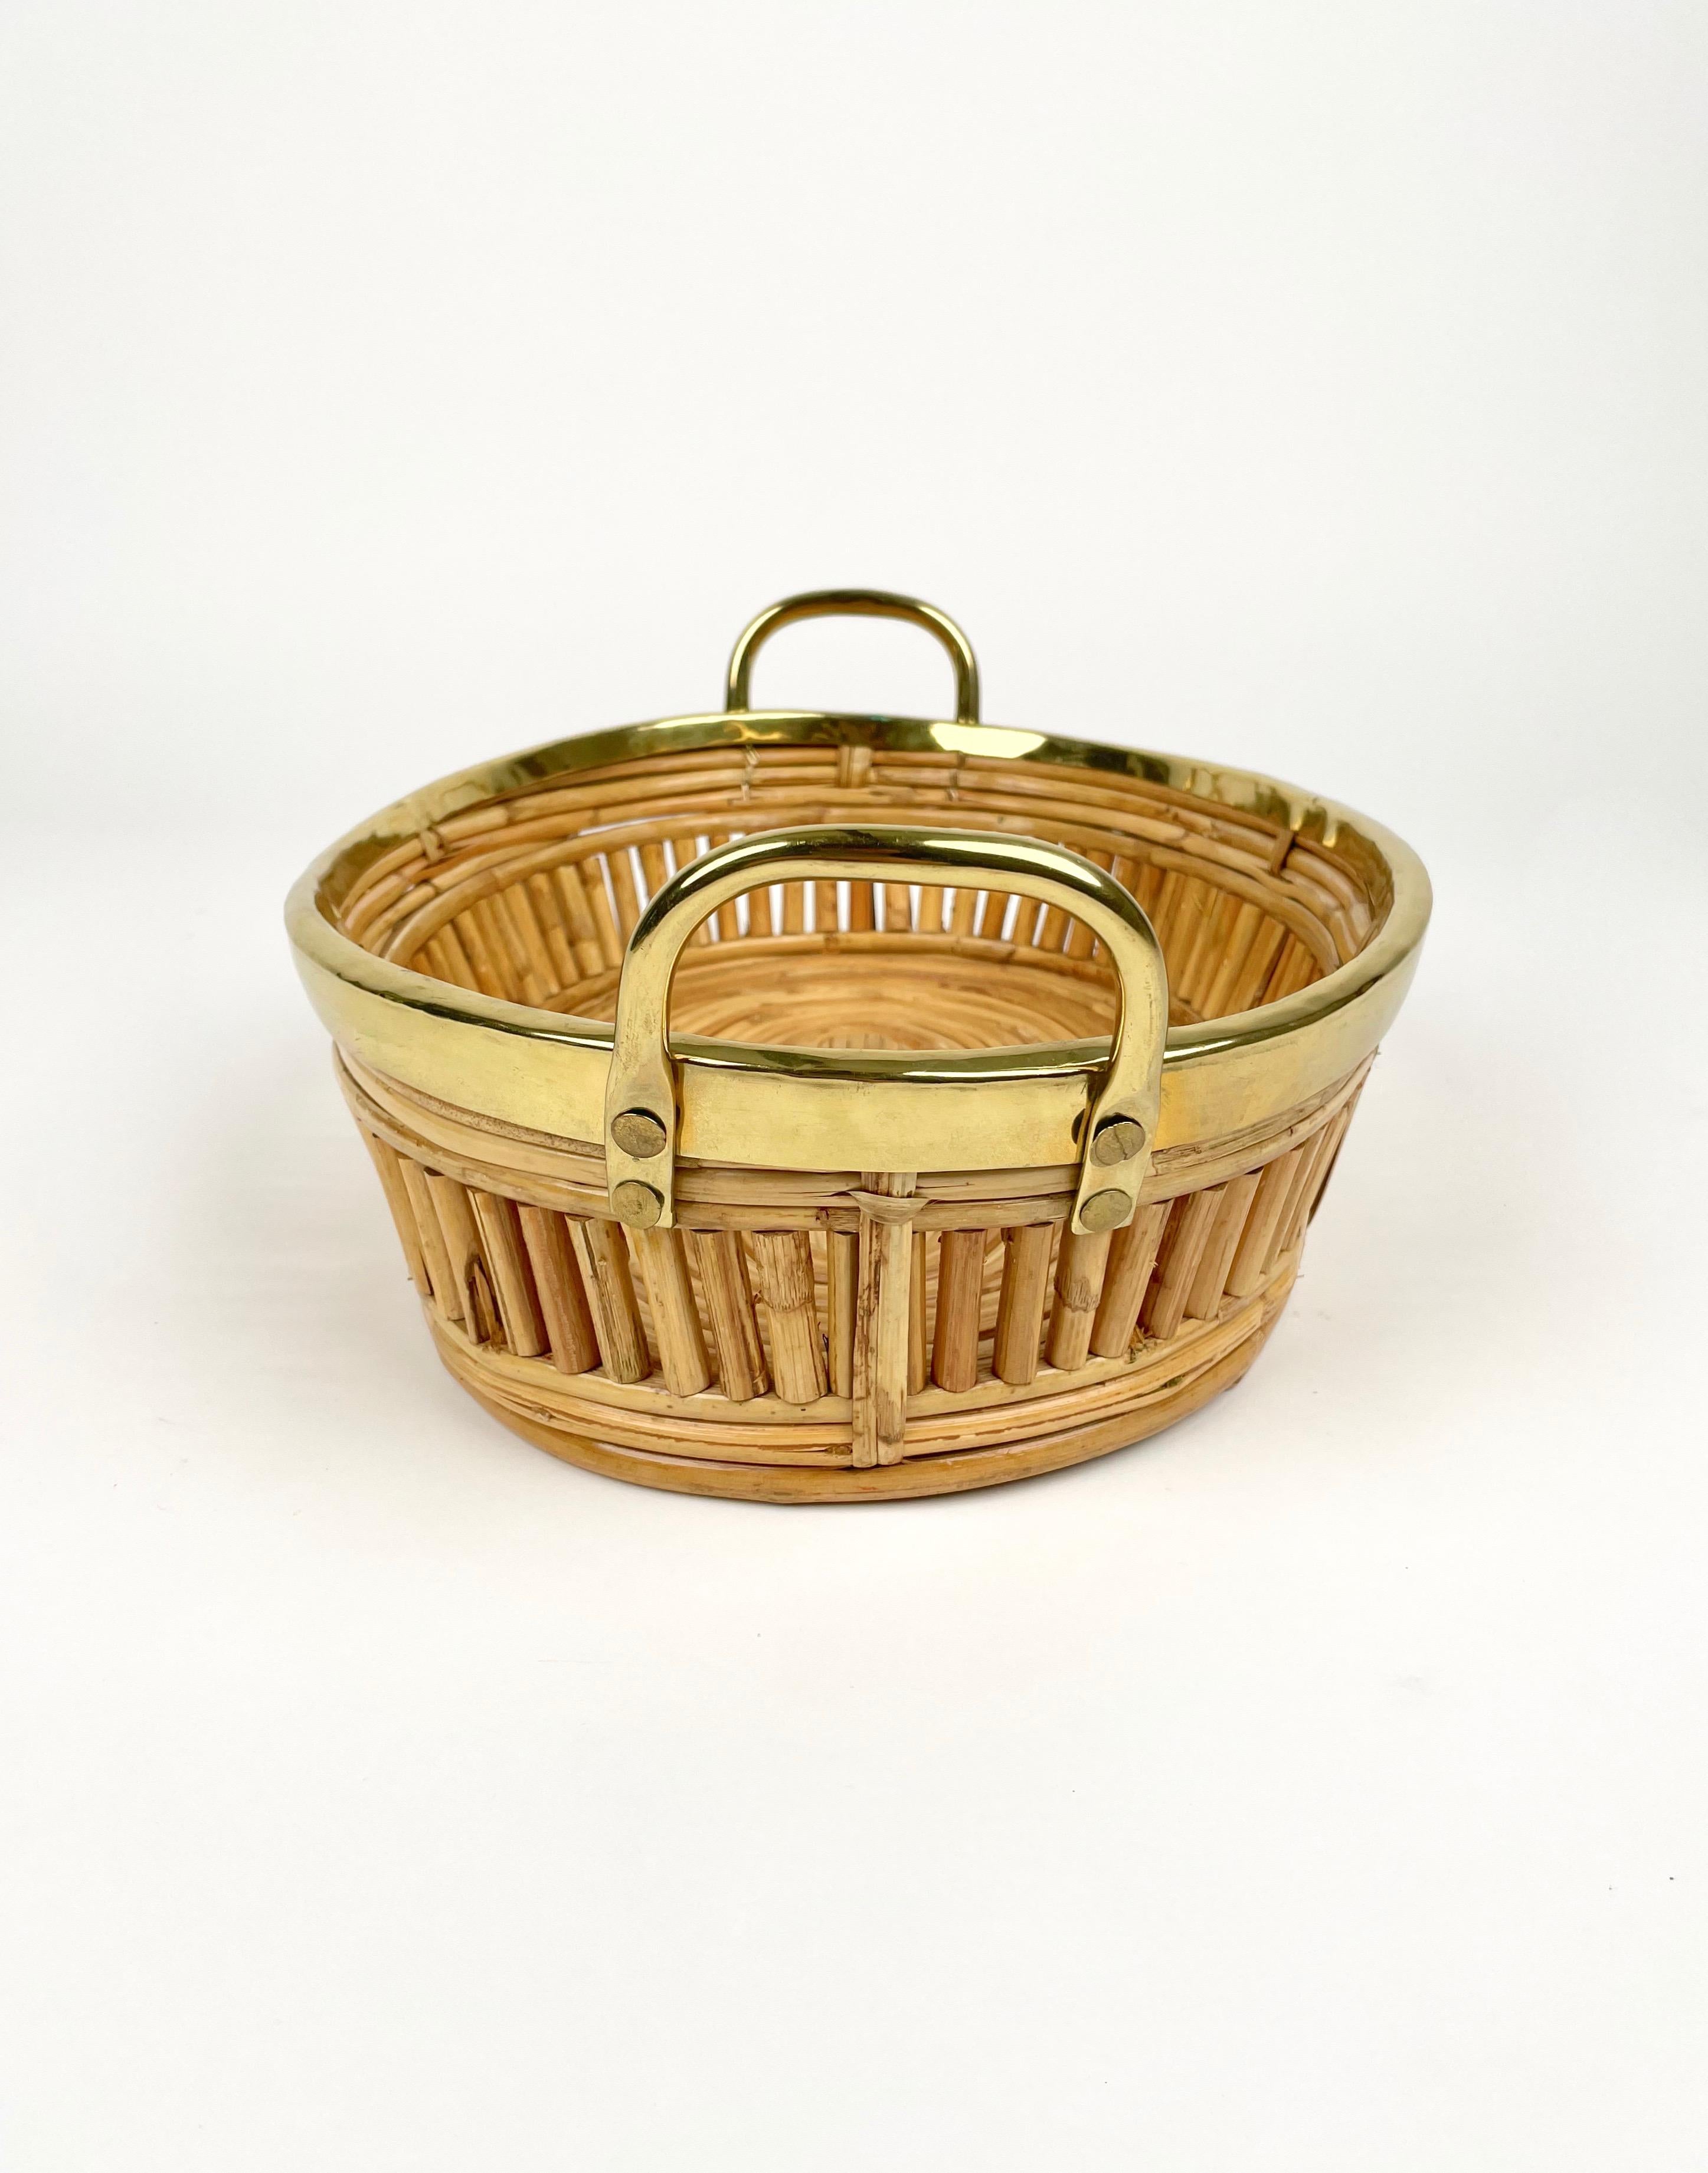 Midcentury Centerpiece Basket Rattan and Brass, Italy 1970s For Sale 5